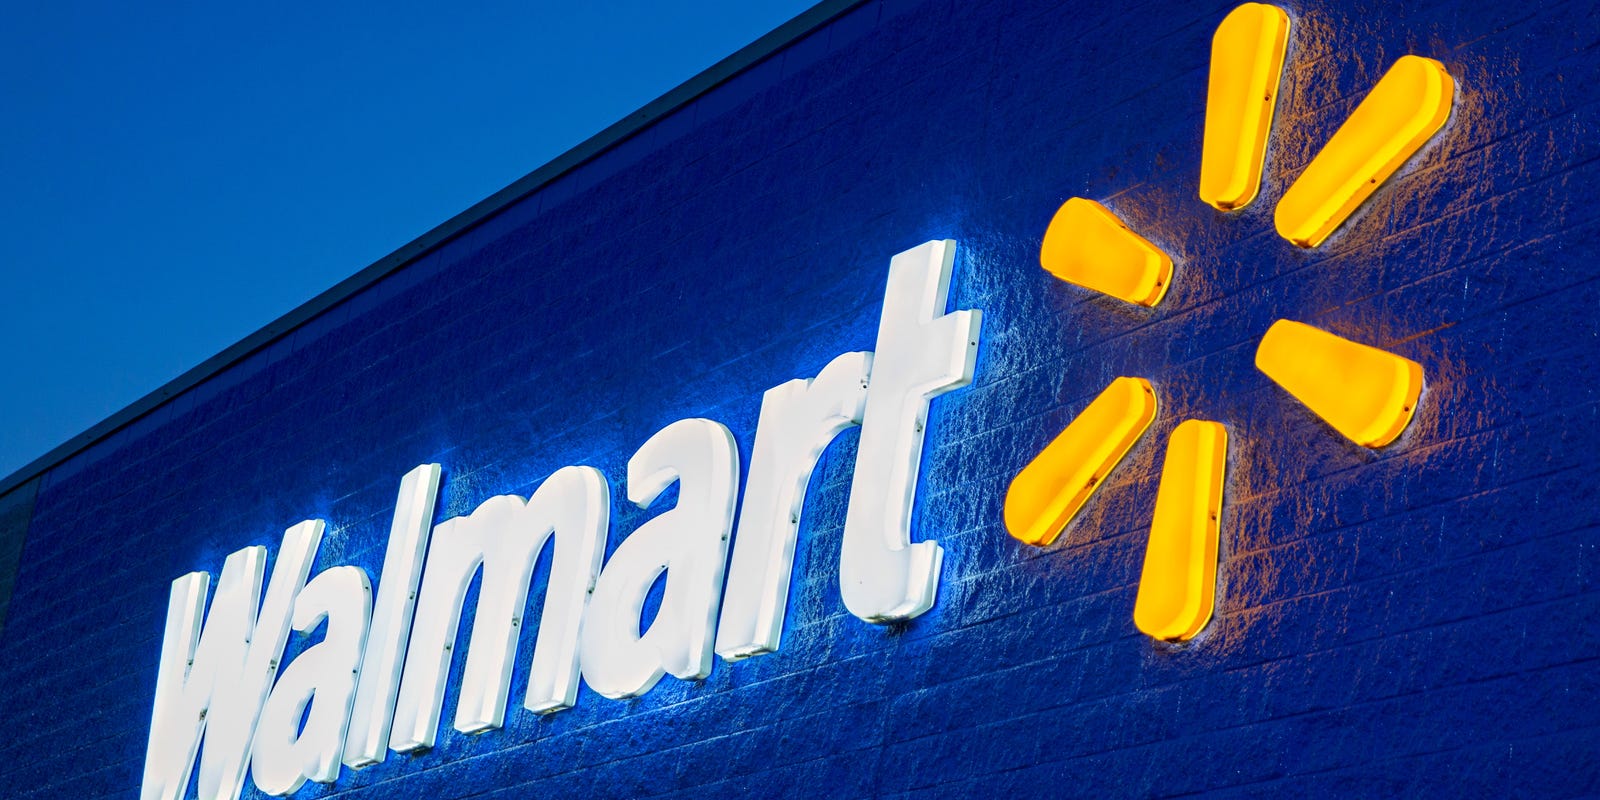 Walmart pay increases: Retailer raising wages for 165,000 employees